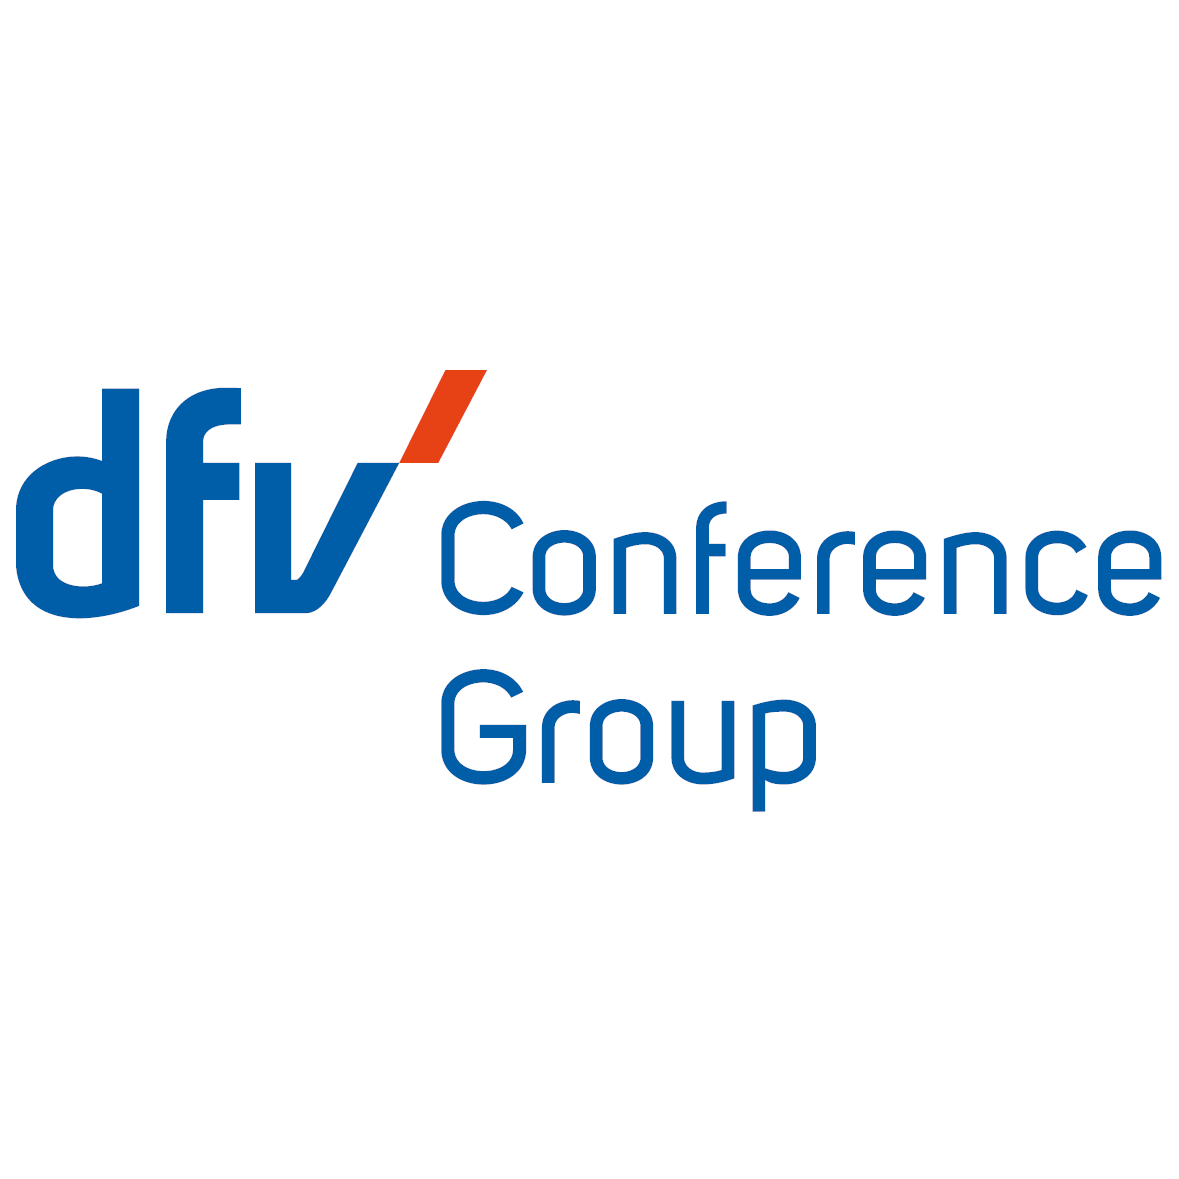 dfv Conference Group